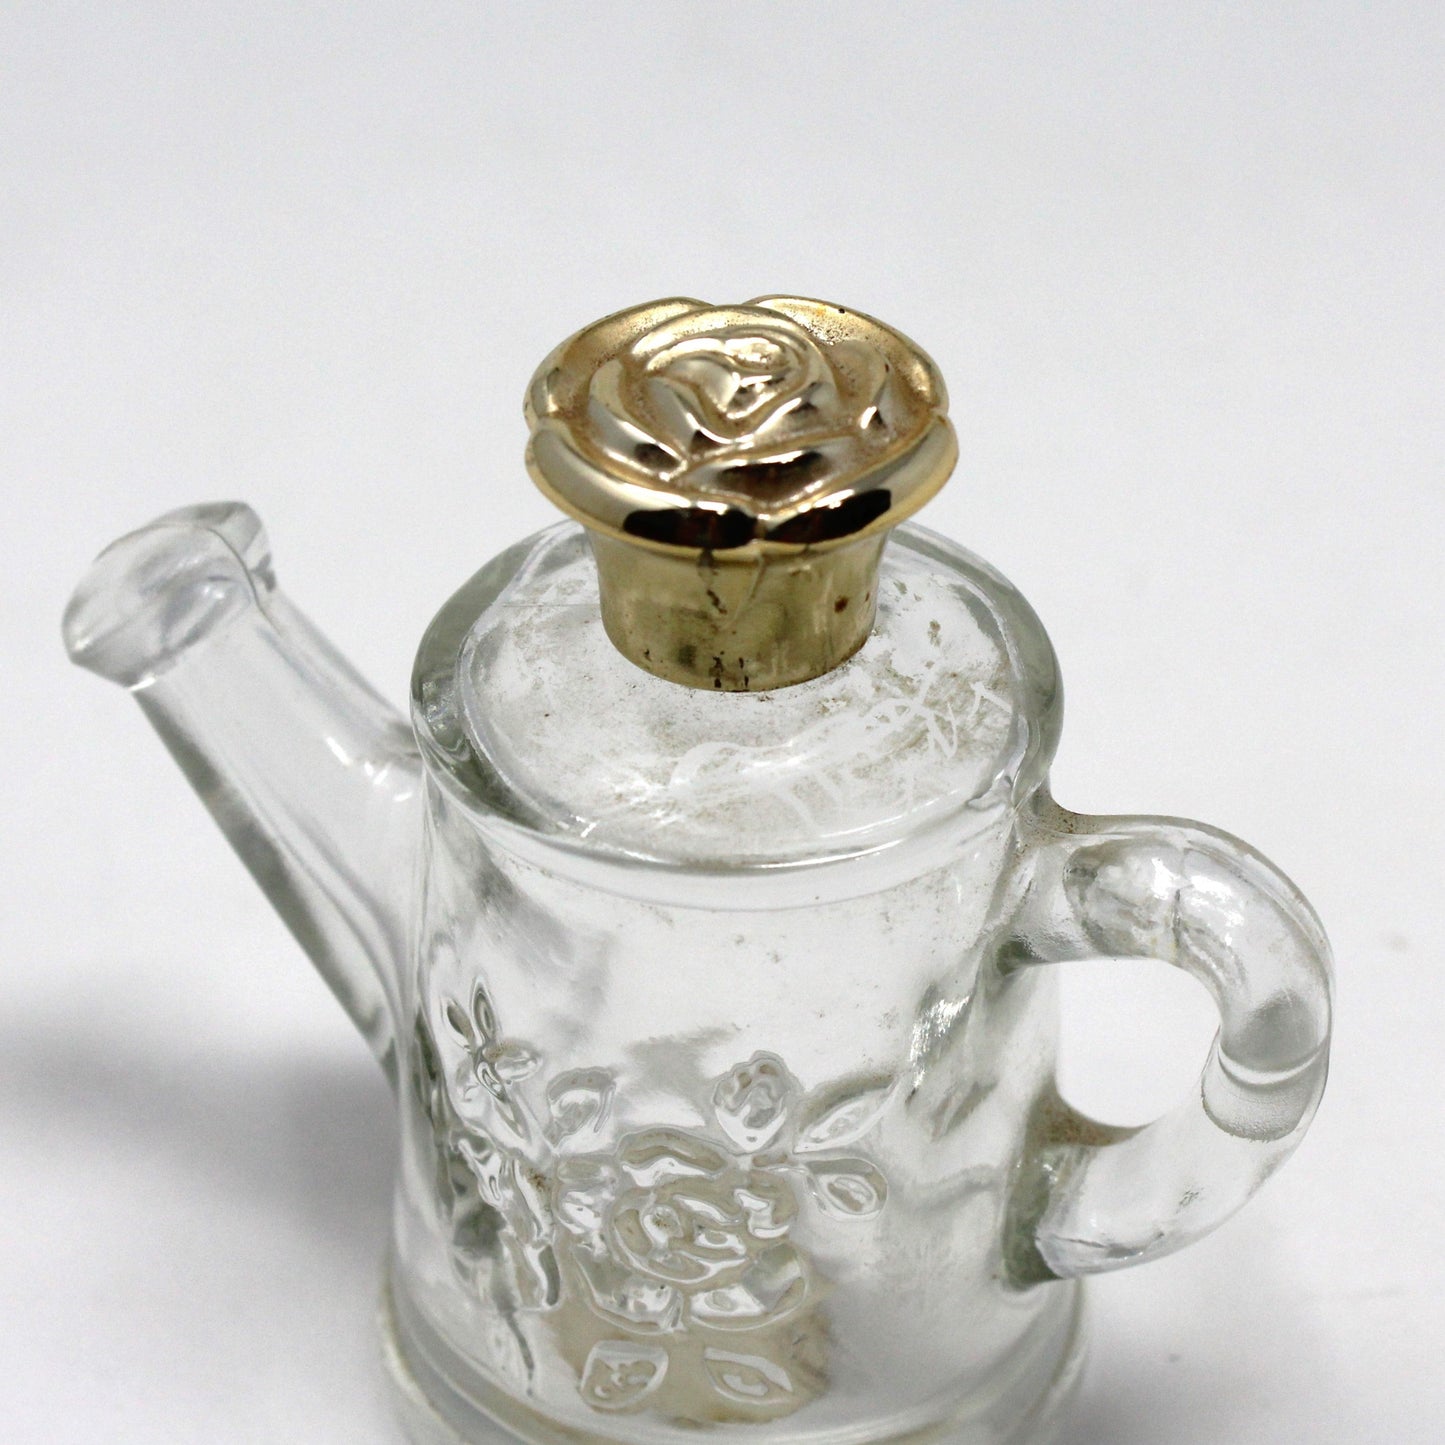 Perfume Bottle, Avon, Watering Can, Embossed Roses, Vintage Collectible